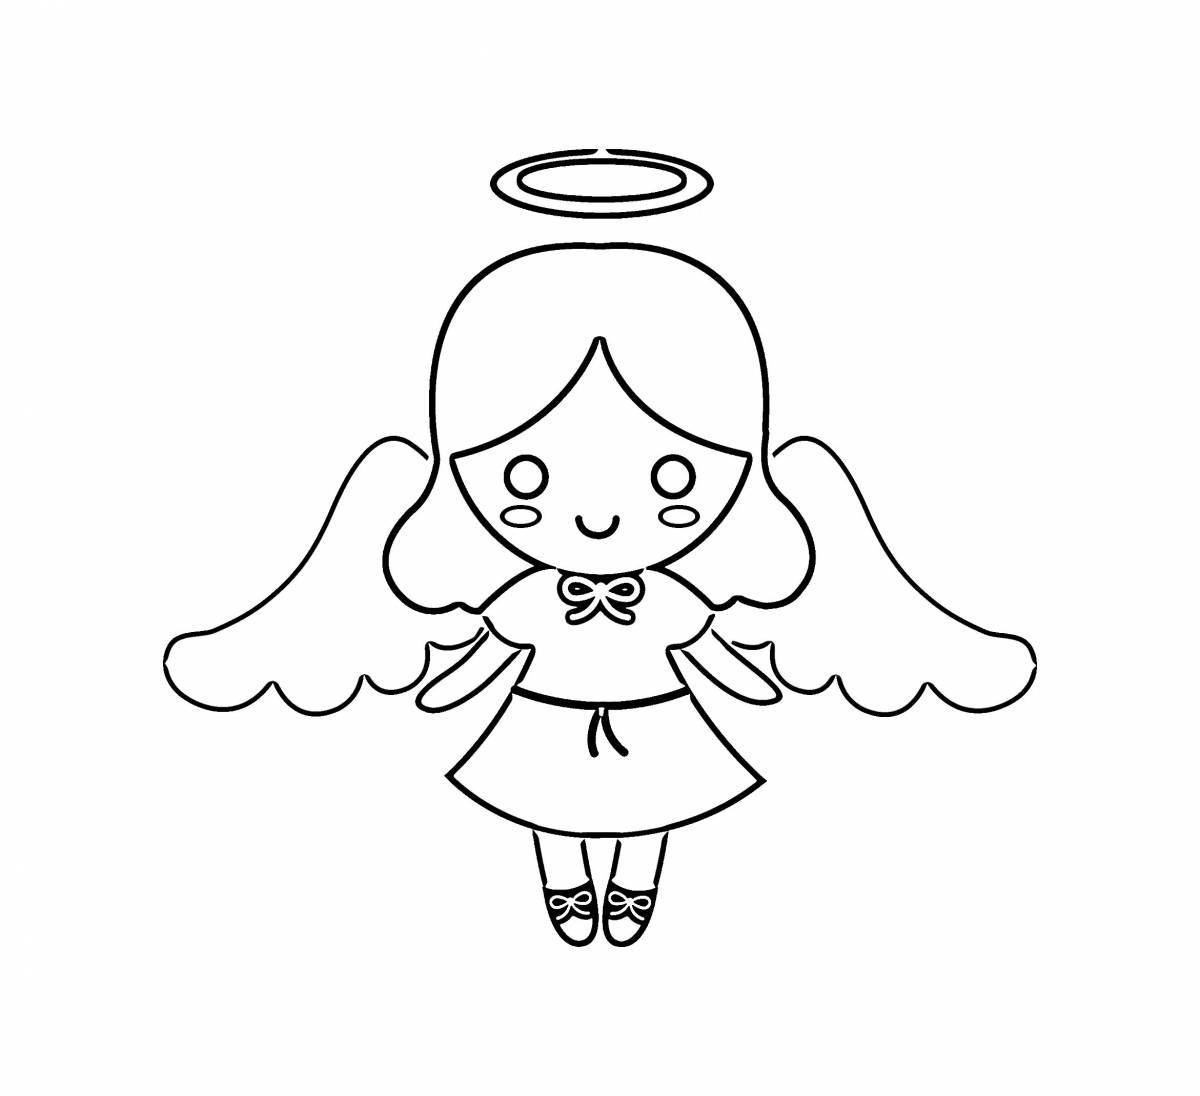 Angel in decoration angel coloring book for kids